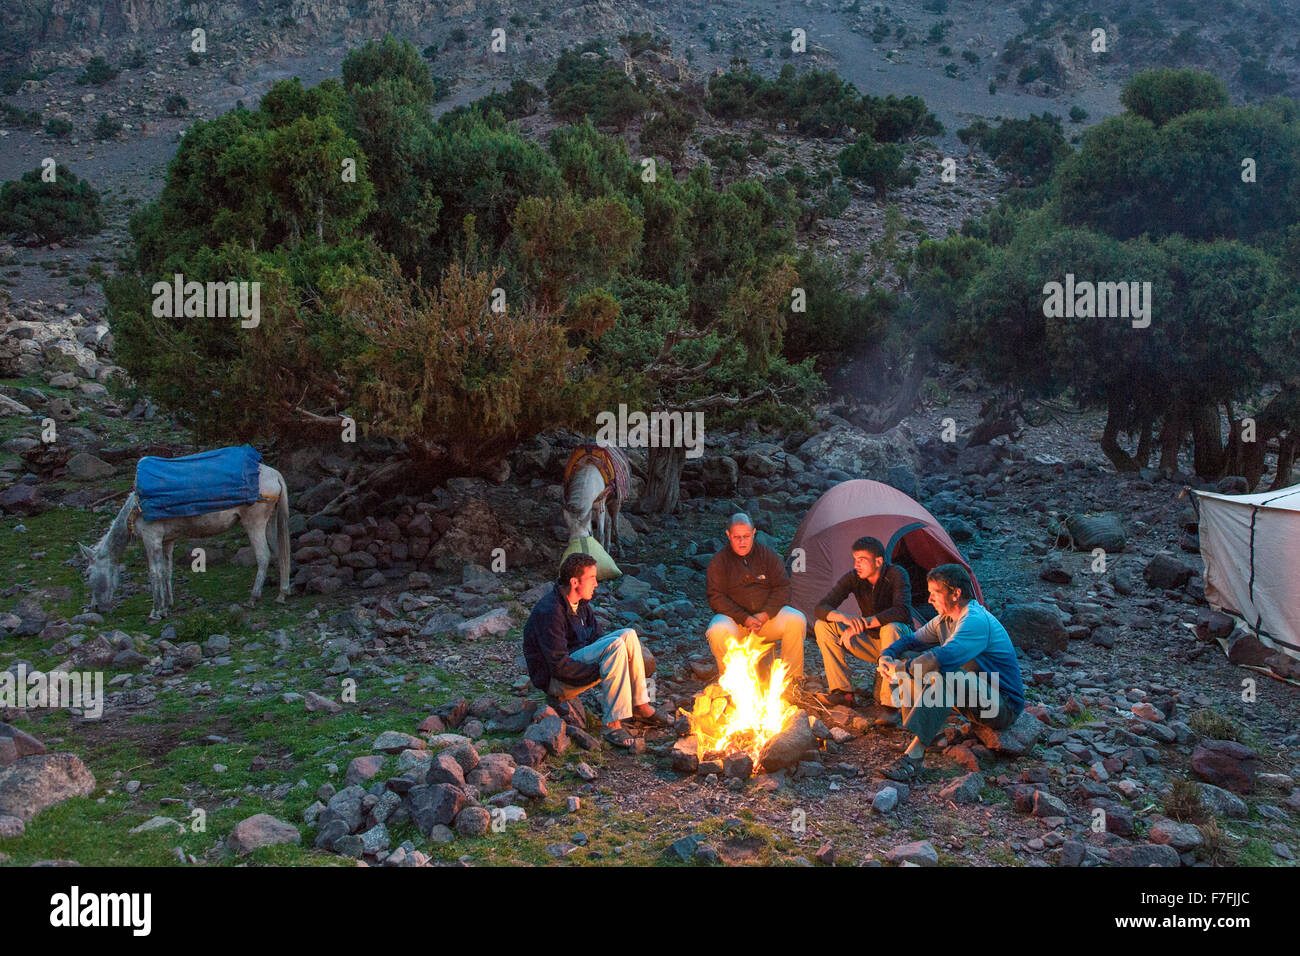 Hikers around a campfire in the Toubkal National Park in the Atlas mountains in Morocco. Stock Photo